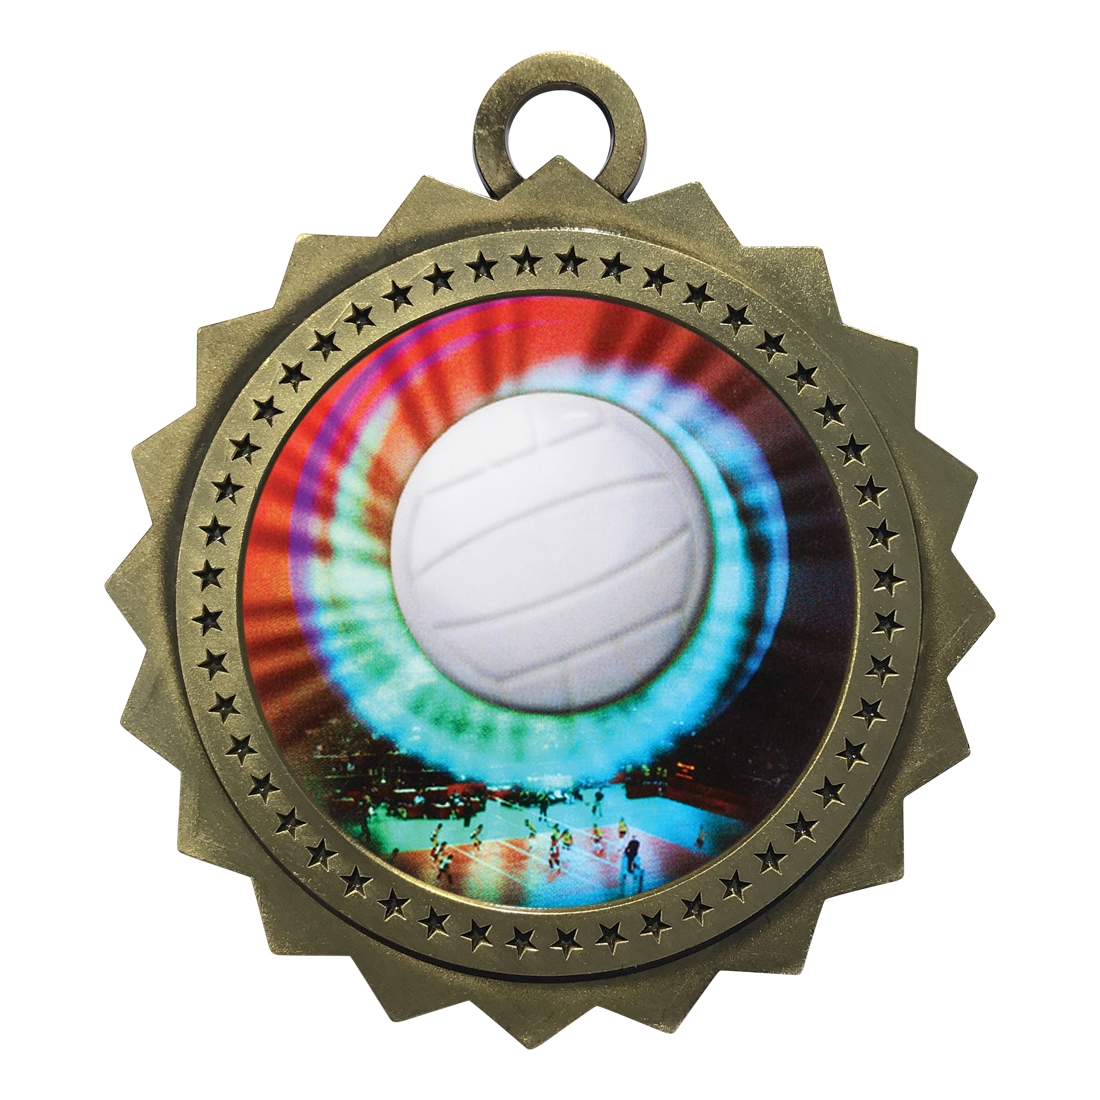 3" Volleyball Medal